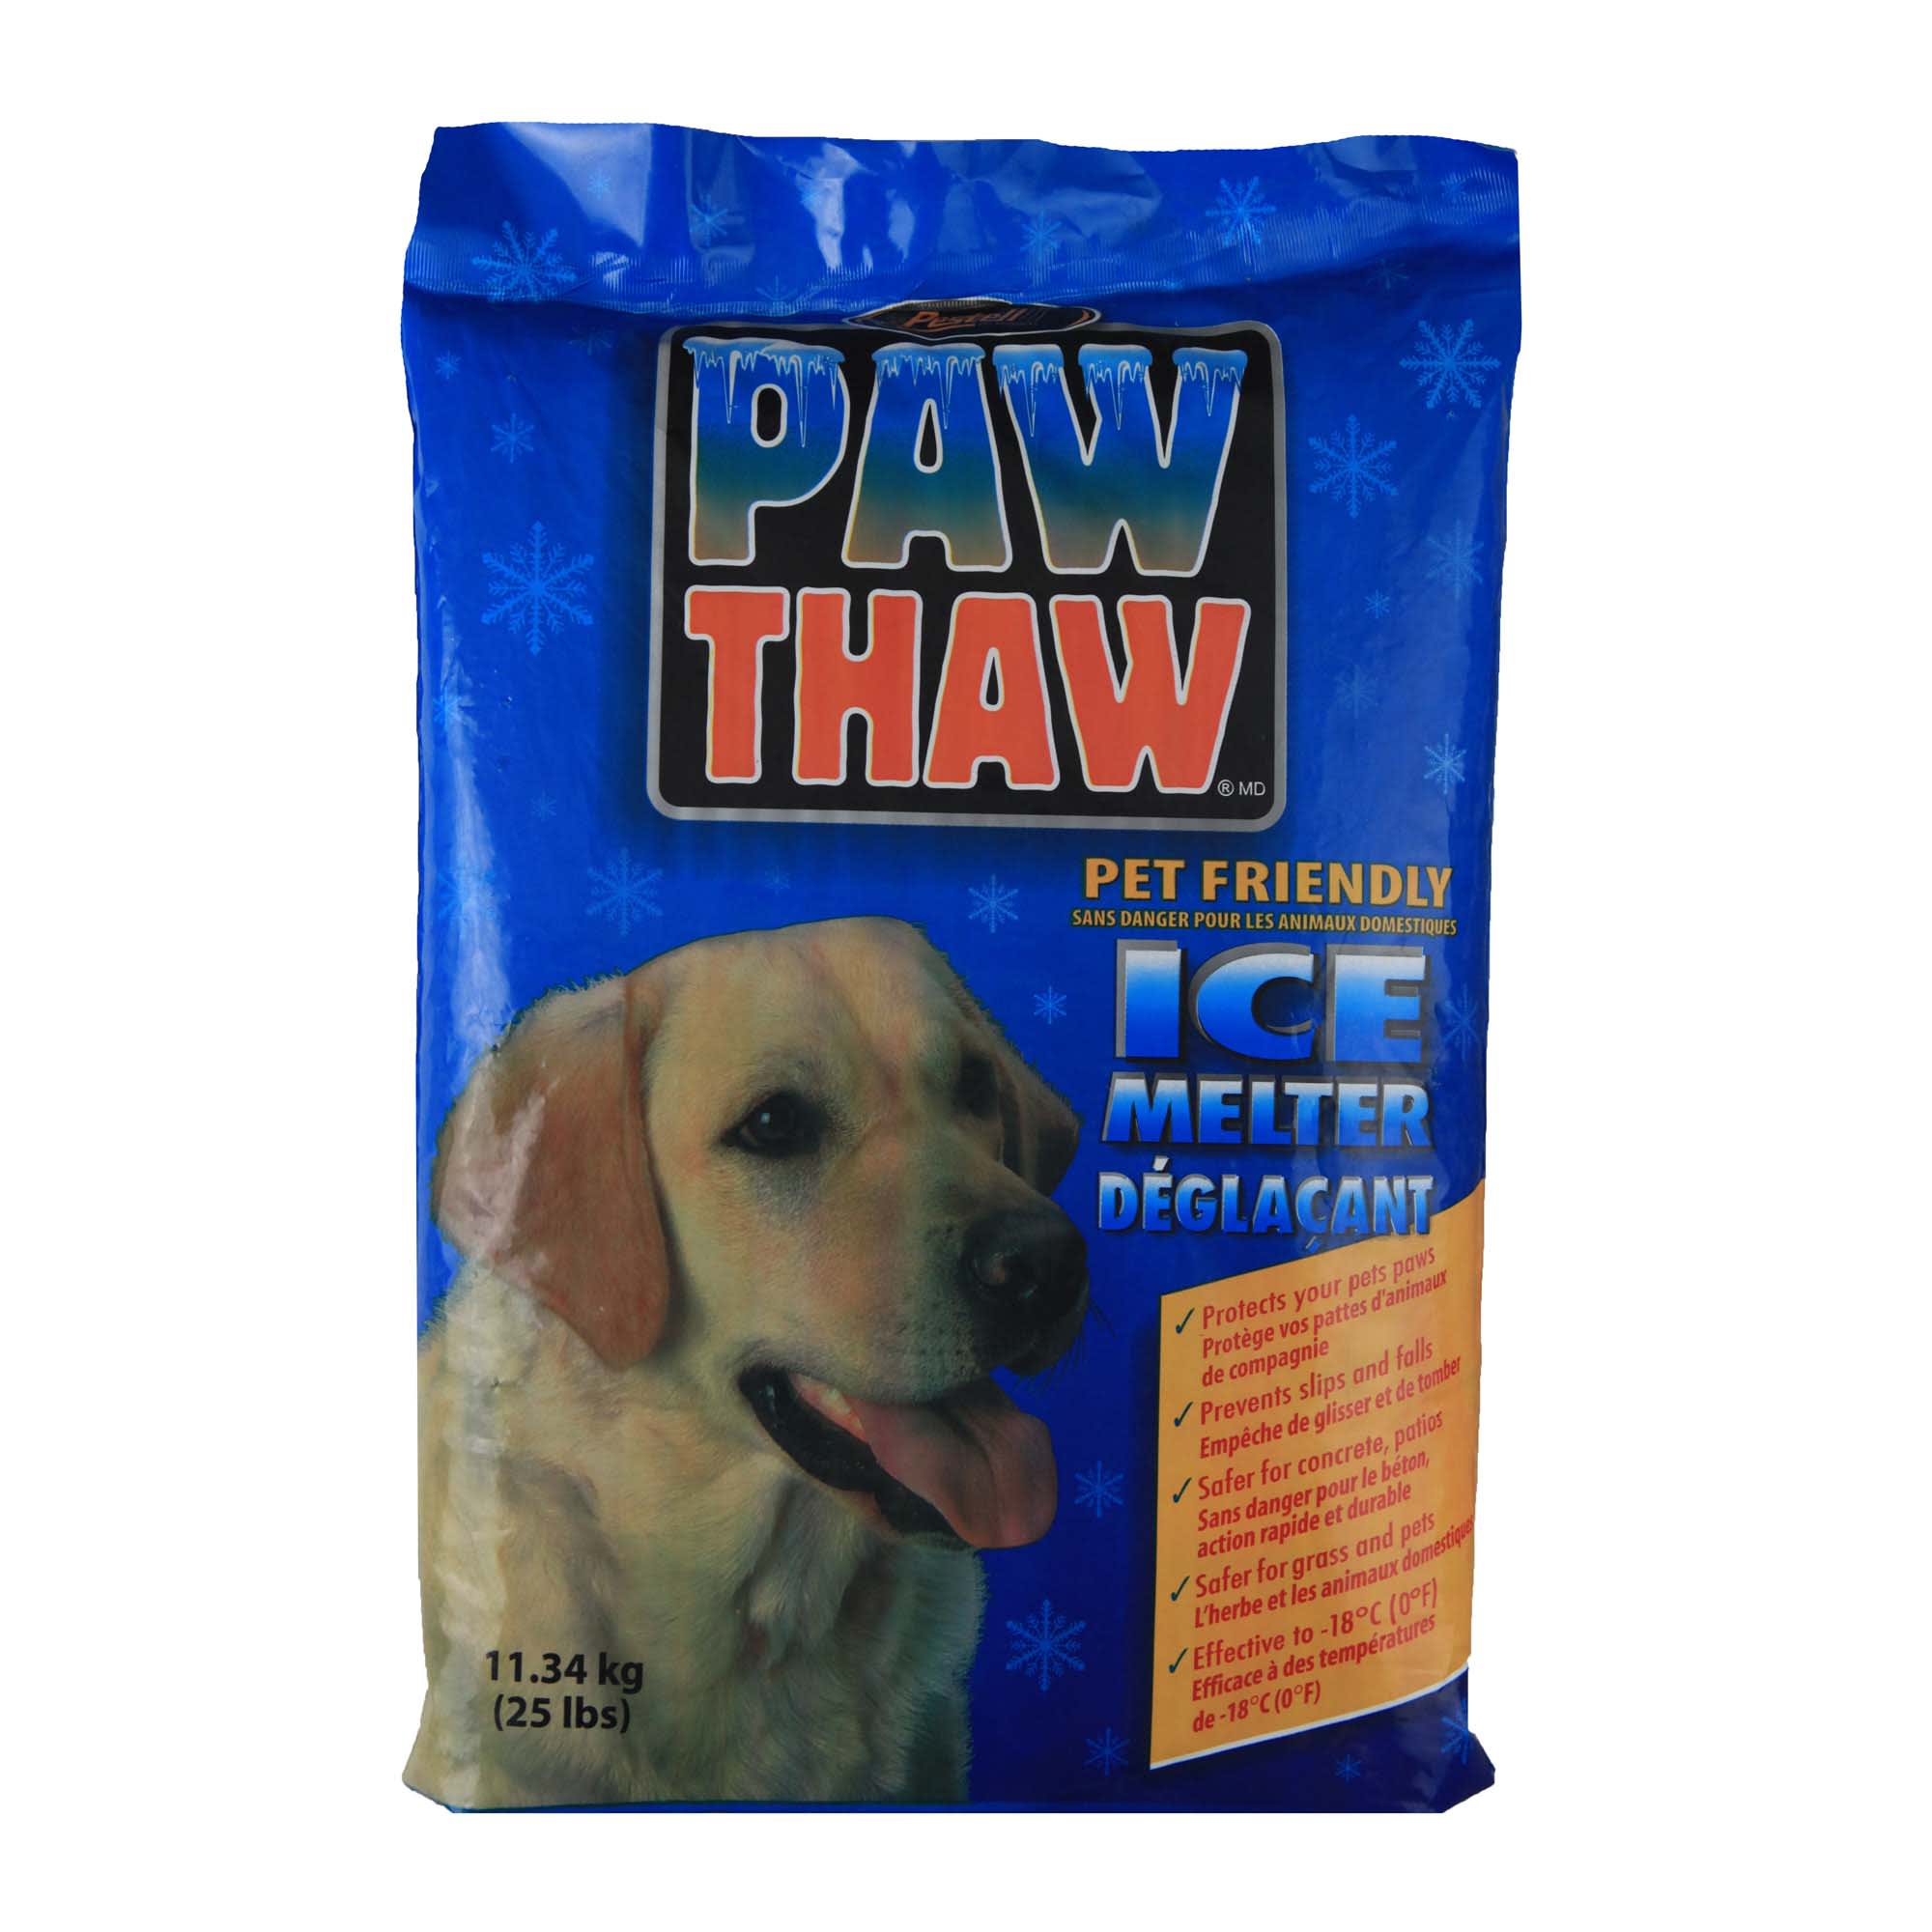 Pestell Paw Thaw Pet Friendly Ice Melter, Bag